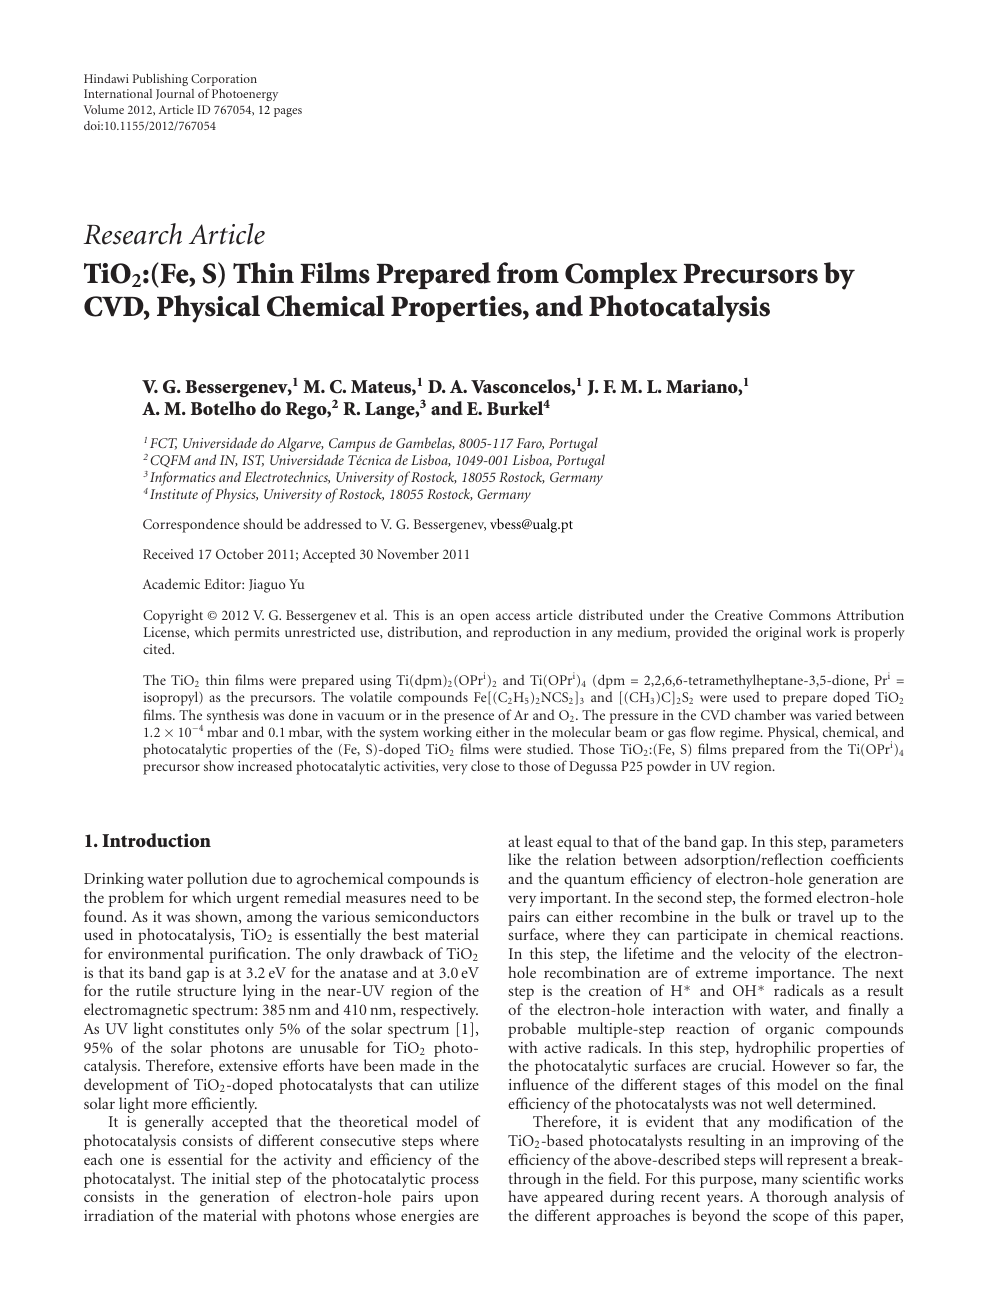 Tio2 Fe S Thin Films Prepared From Complex Precursors By Cvd Physical Chemical Properties And Photocatalysis Topic Of Research Paper In Chemical Sciences Download Scholarly Article Pdf And Read For Free On